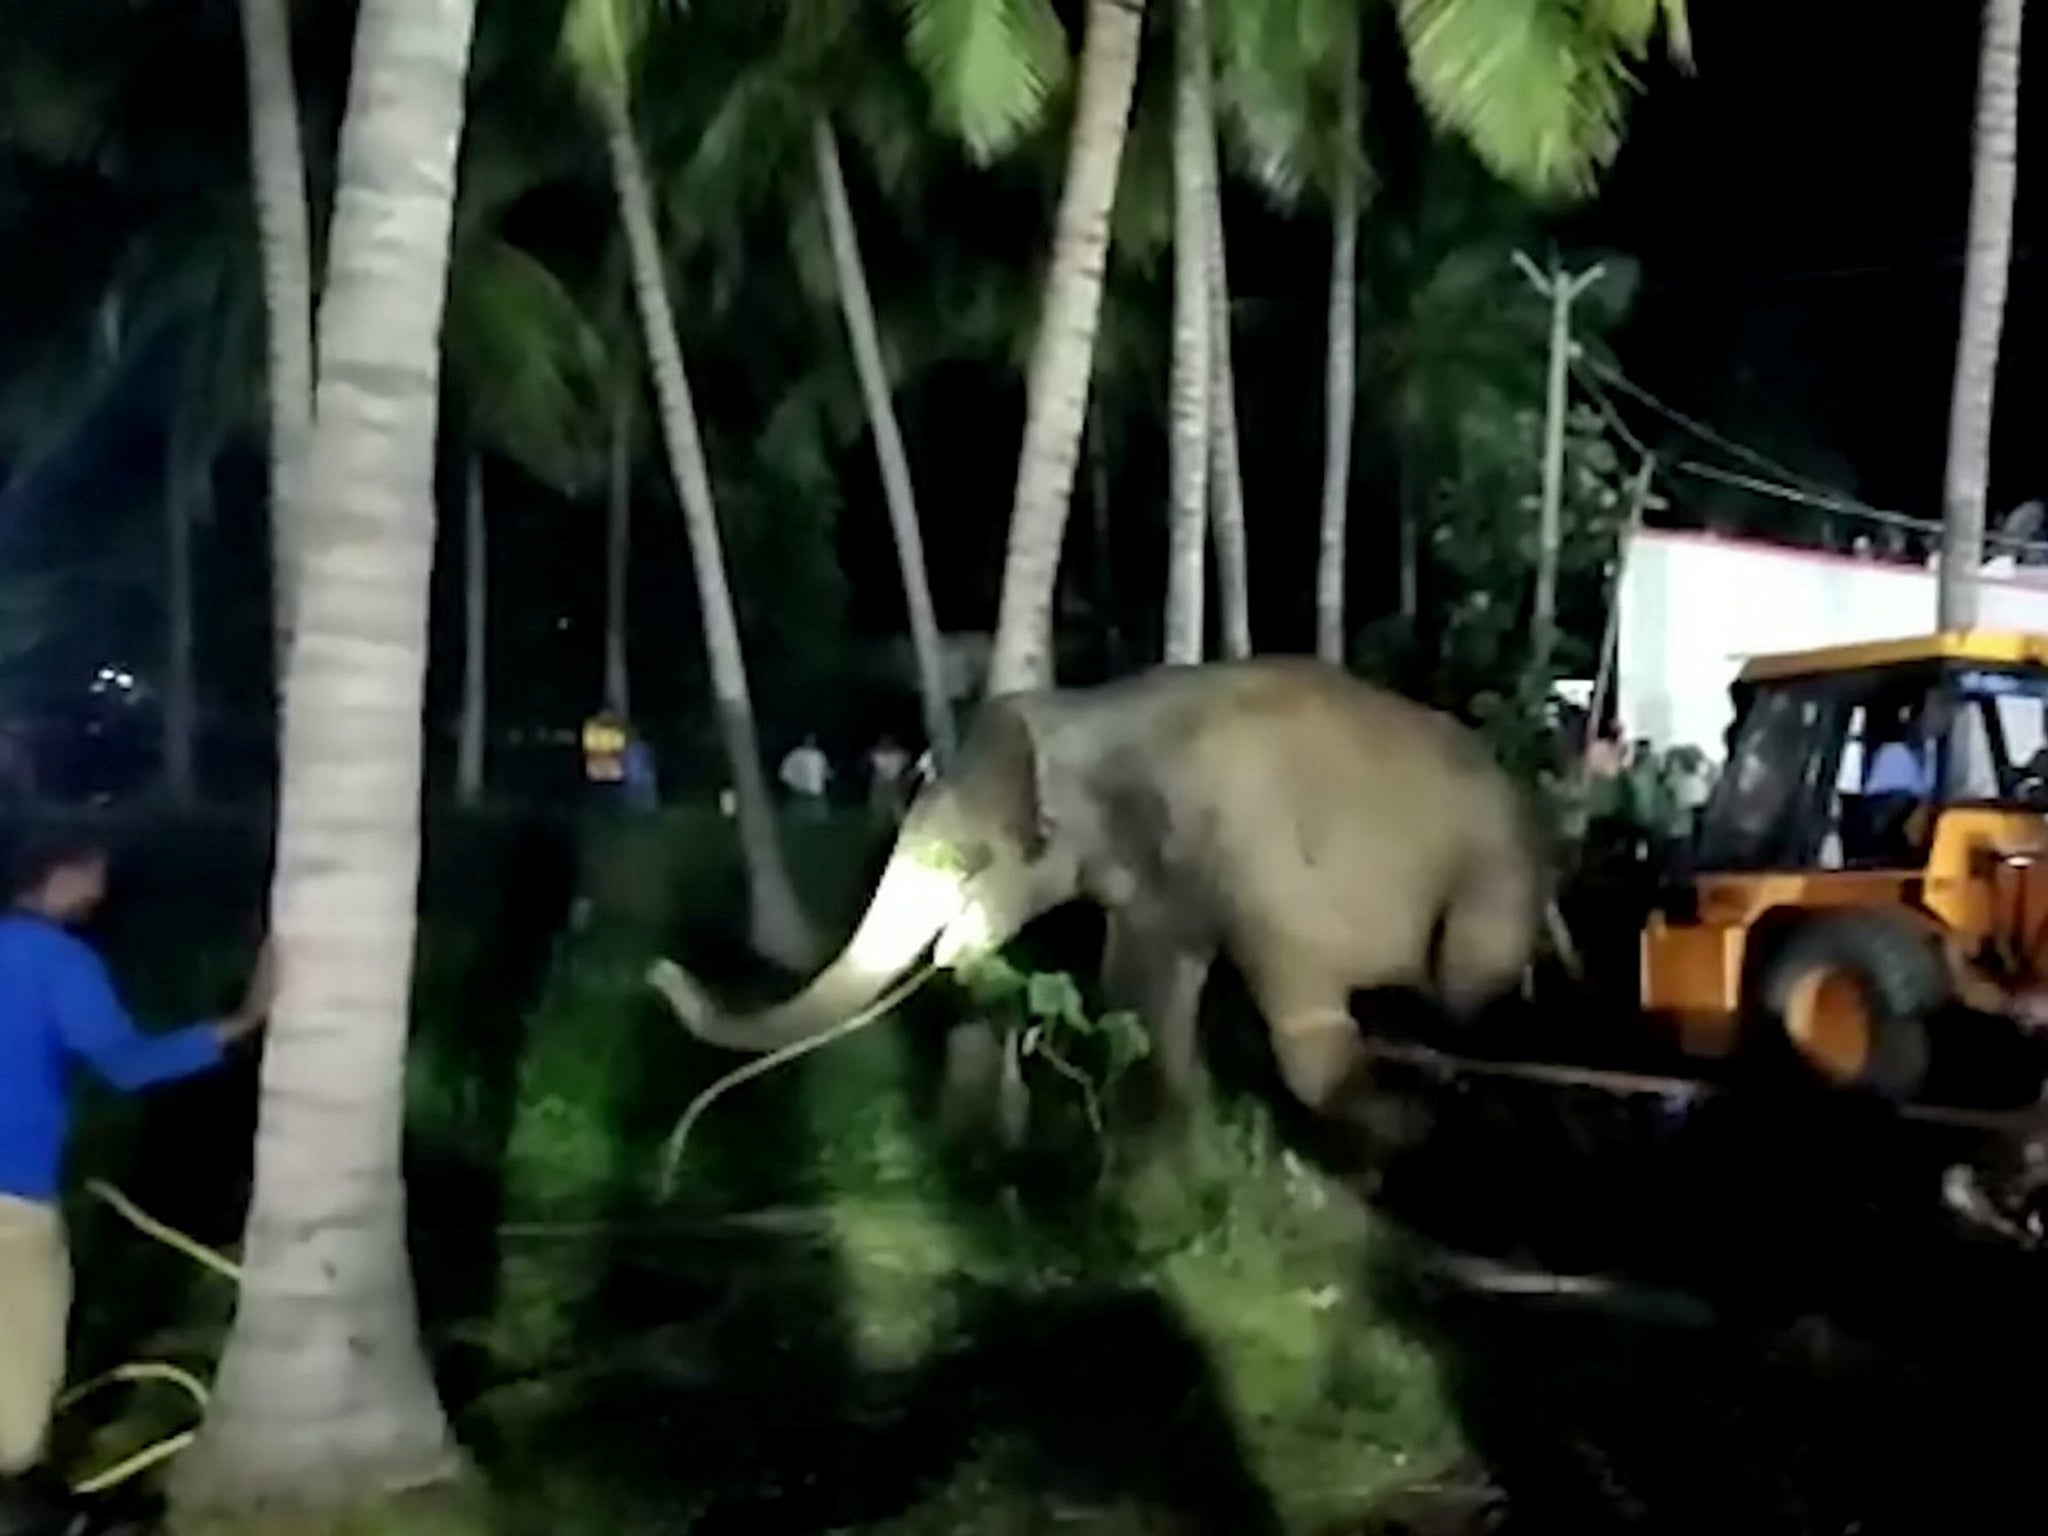 The elephant will now be released into the Hosur forest area surround the village.